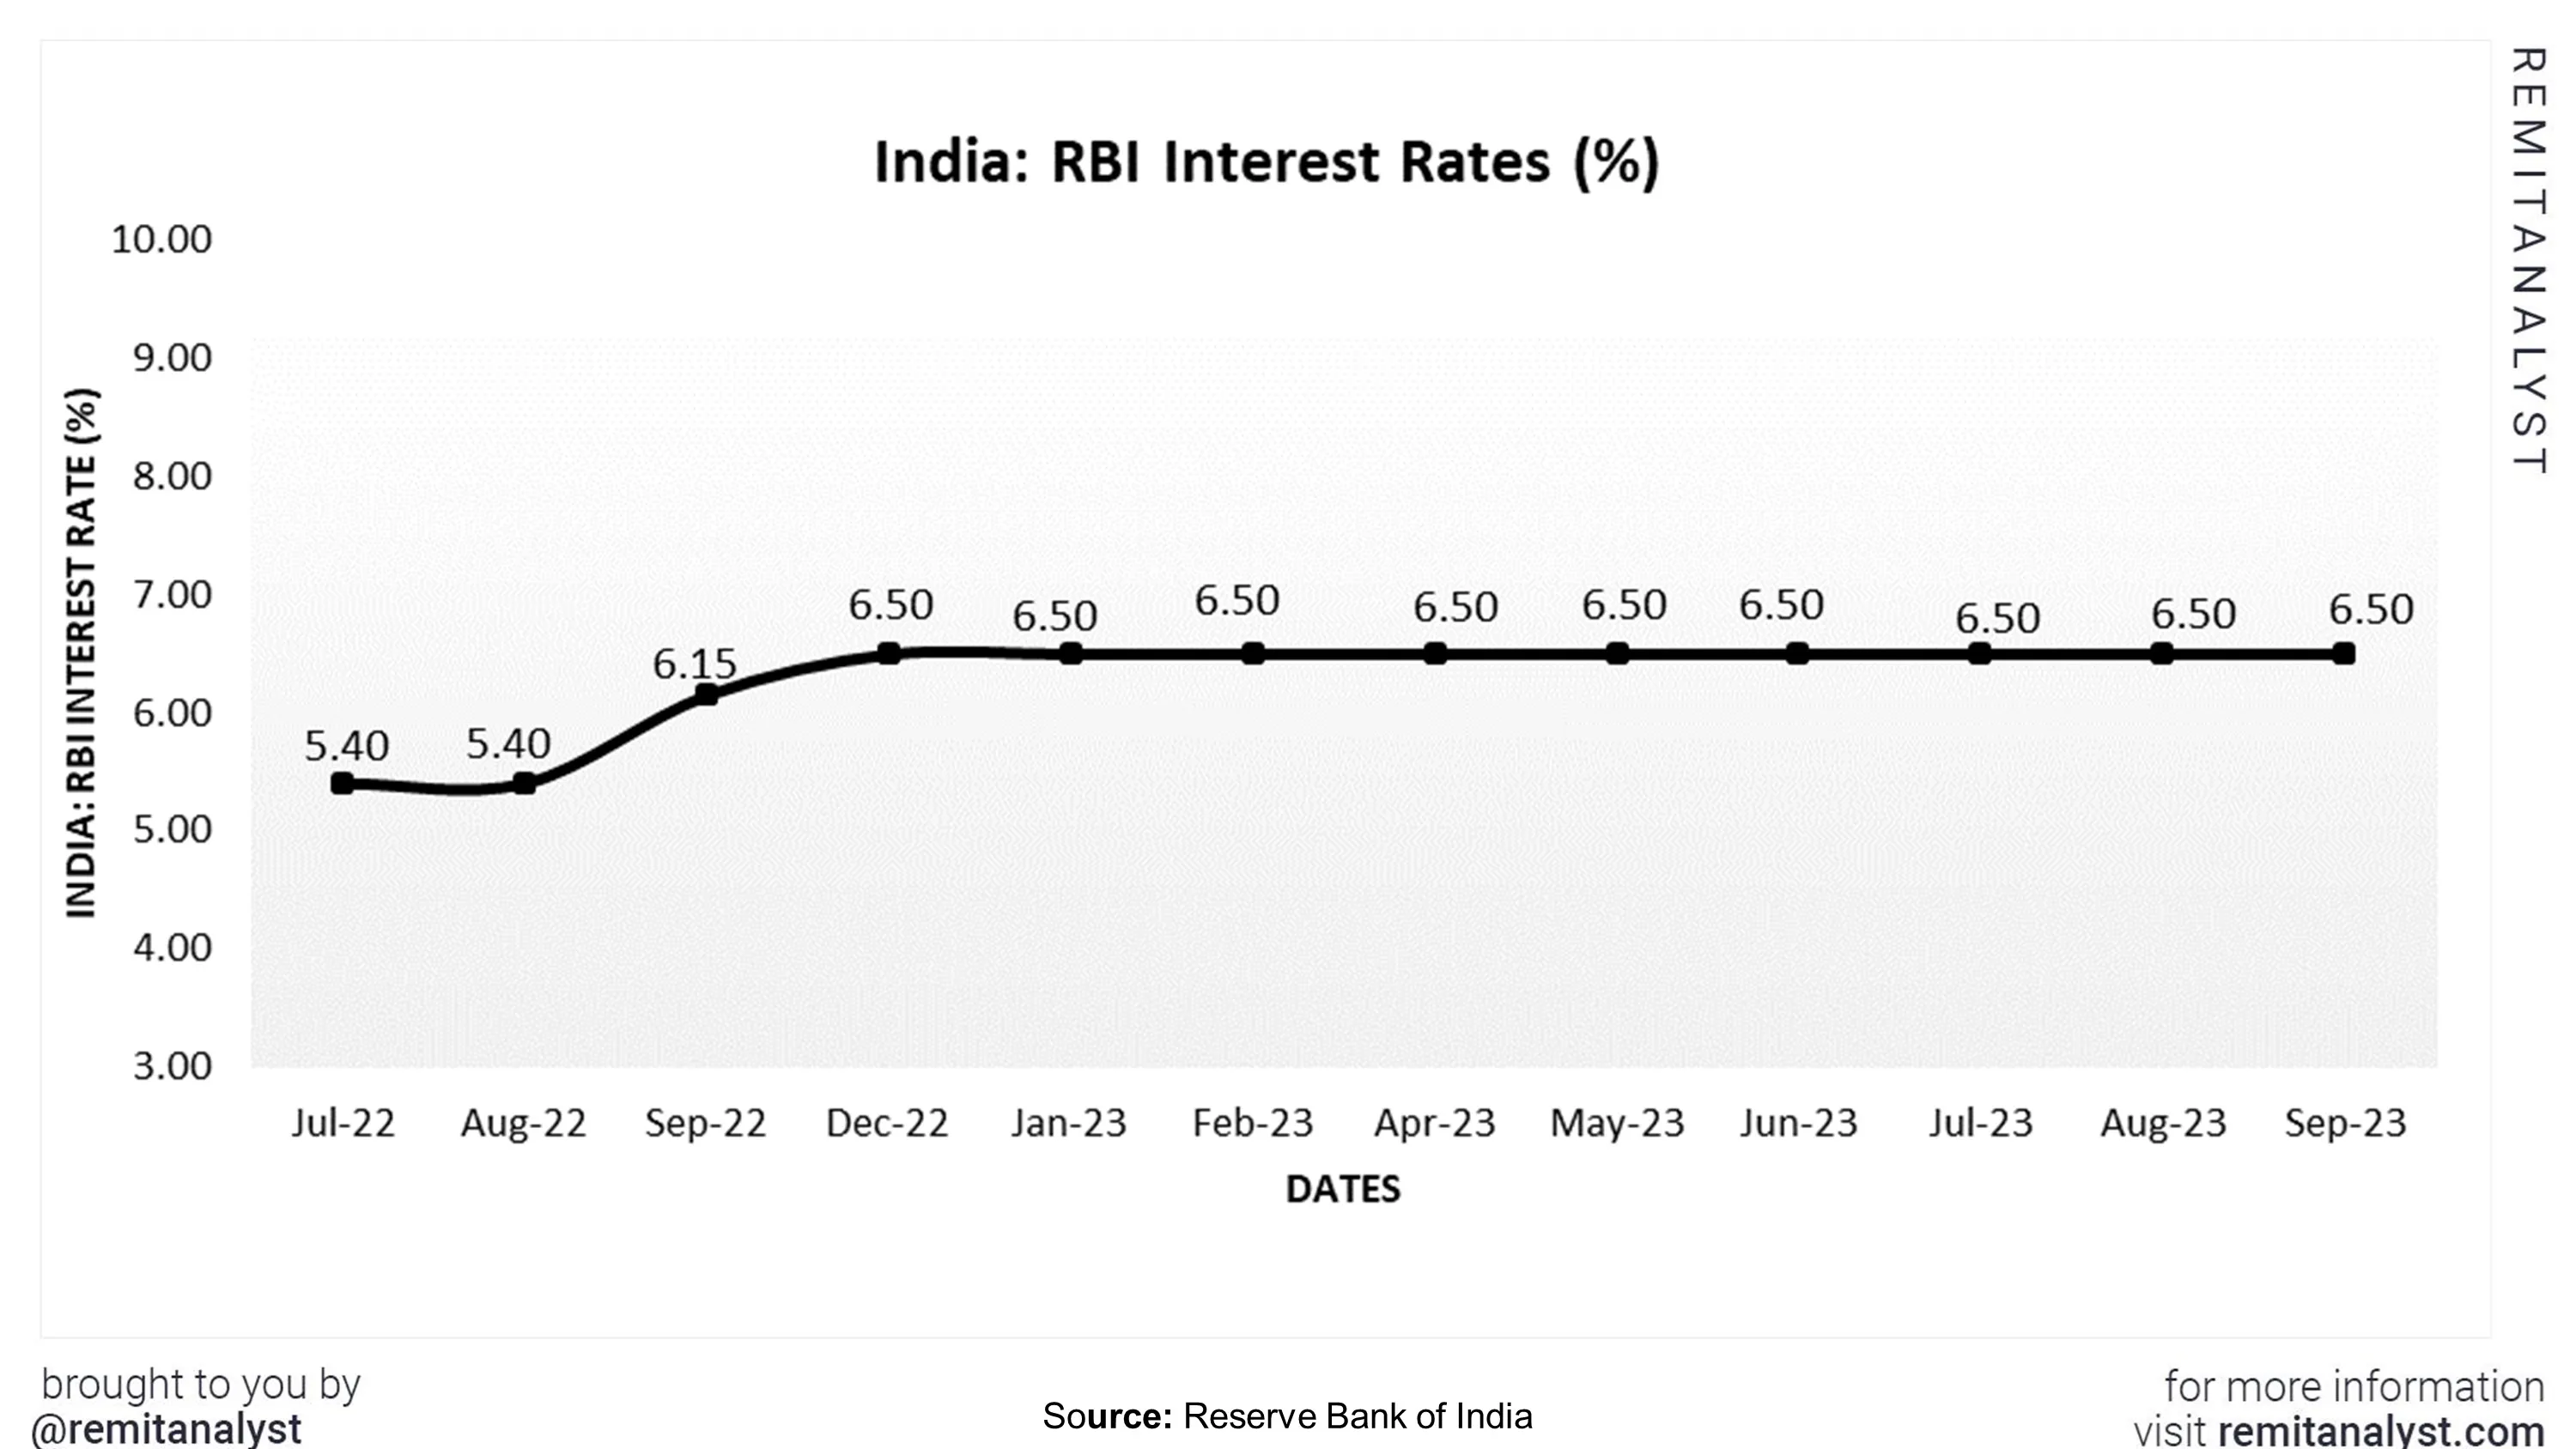 interest-rates-in-india-from-jul-2022-to-sep-2023